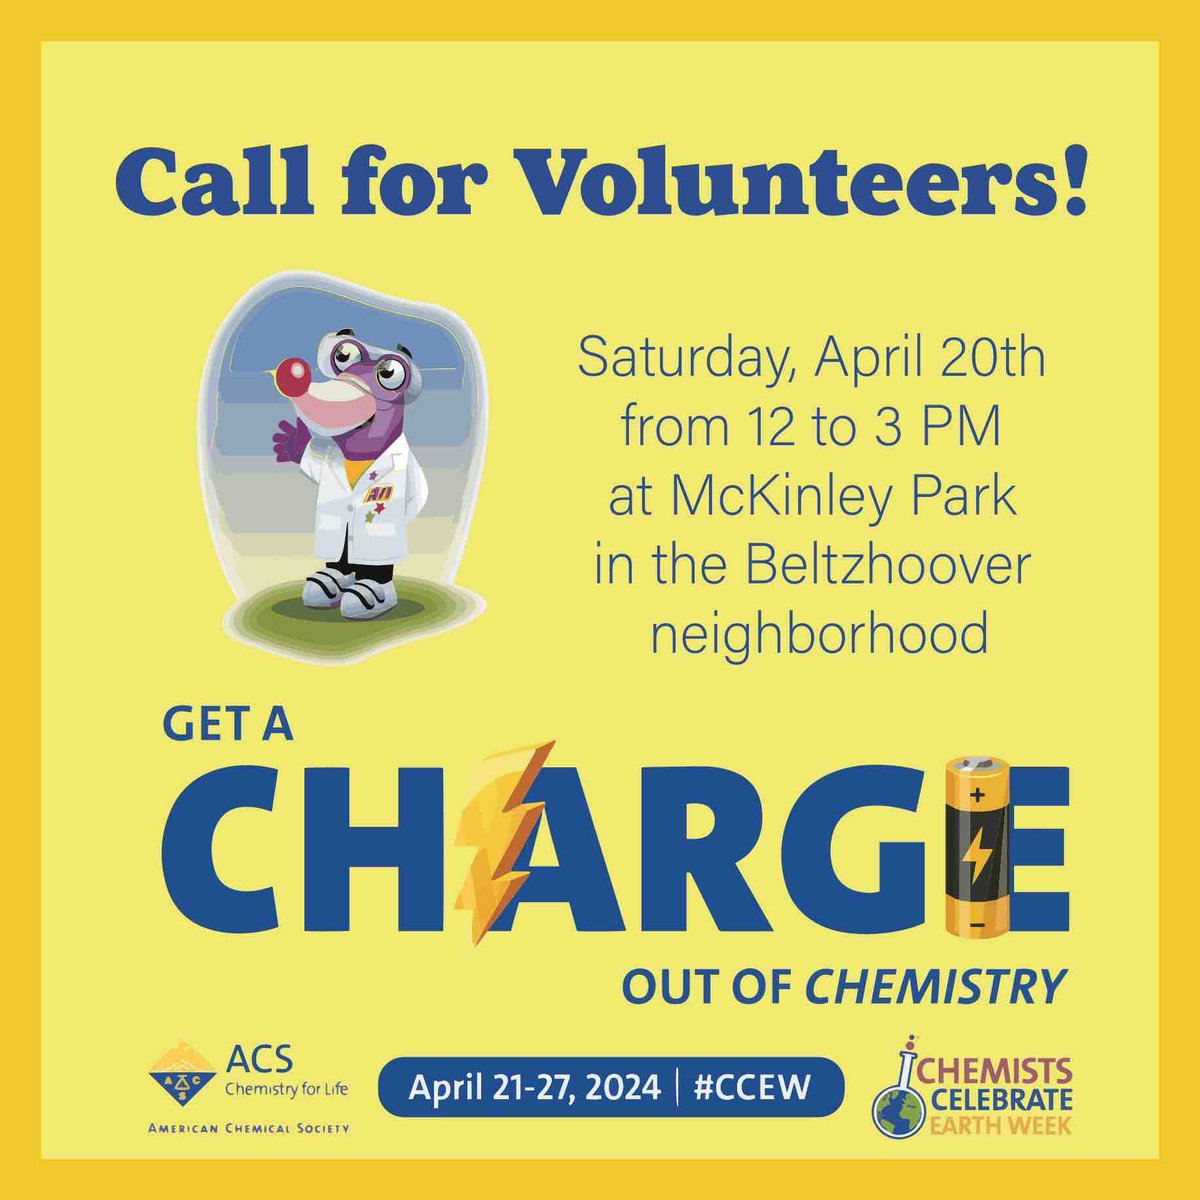 The Pittsburgh Section of the American Chemical Society and Pittsburgh Parks Conservancy needs volunteers to share the chemistry of batteries with the community! All materials and training will be provided. Please contact Alysia Mandato, atm75@pitt.edu, if interested.